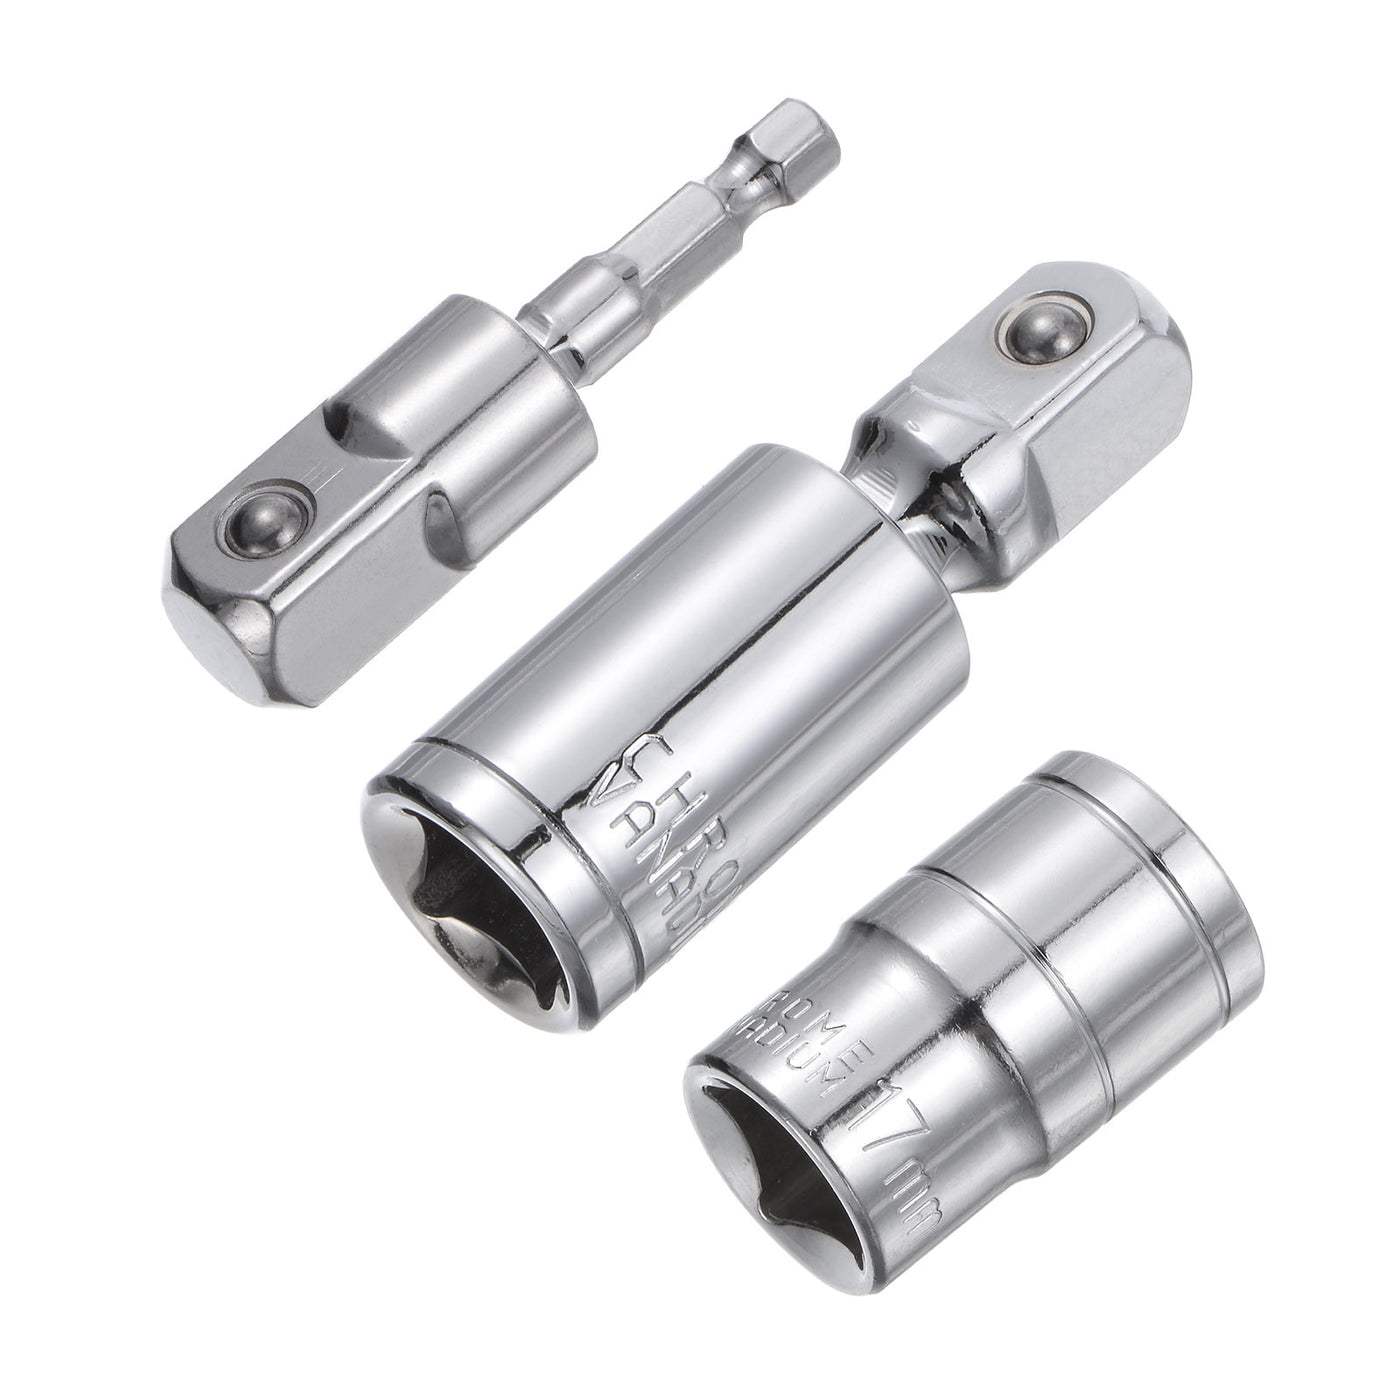 uxcell Uxcell 1/2" Drive 17mm Shallow Socket Swivel Joints Hex Shank Impact Driver Adaptor Set